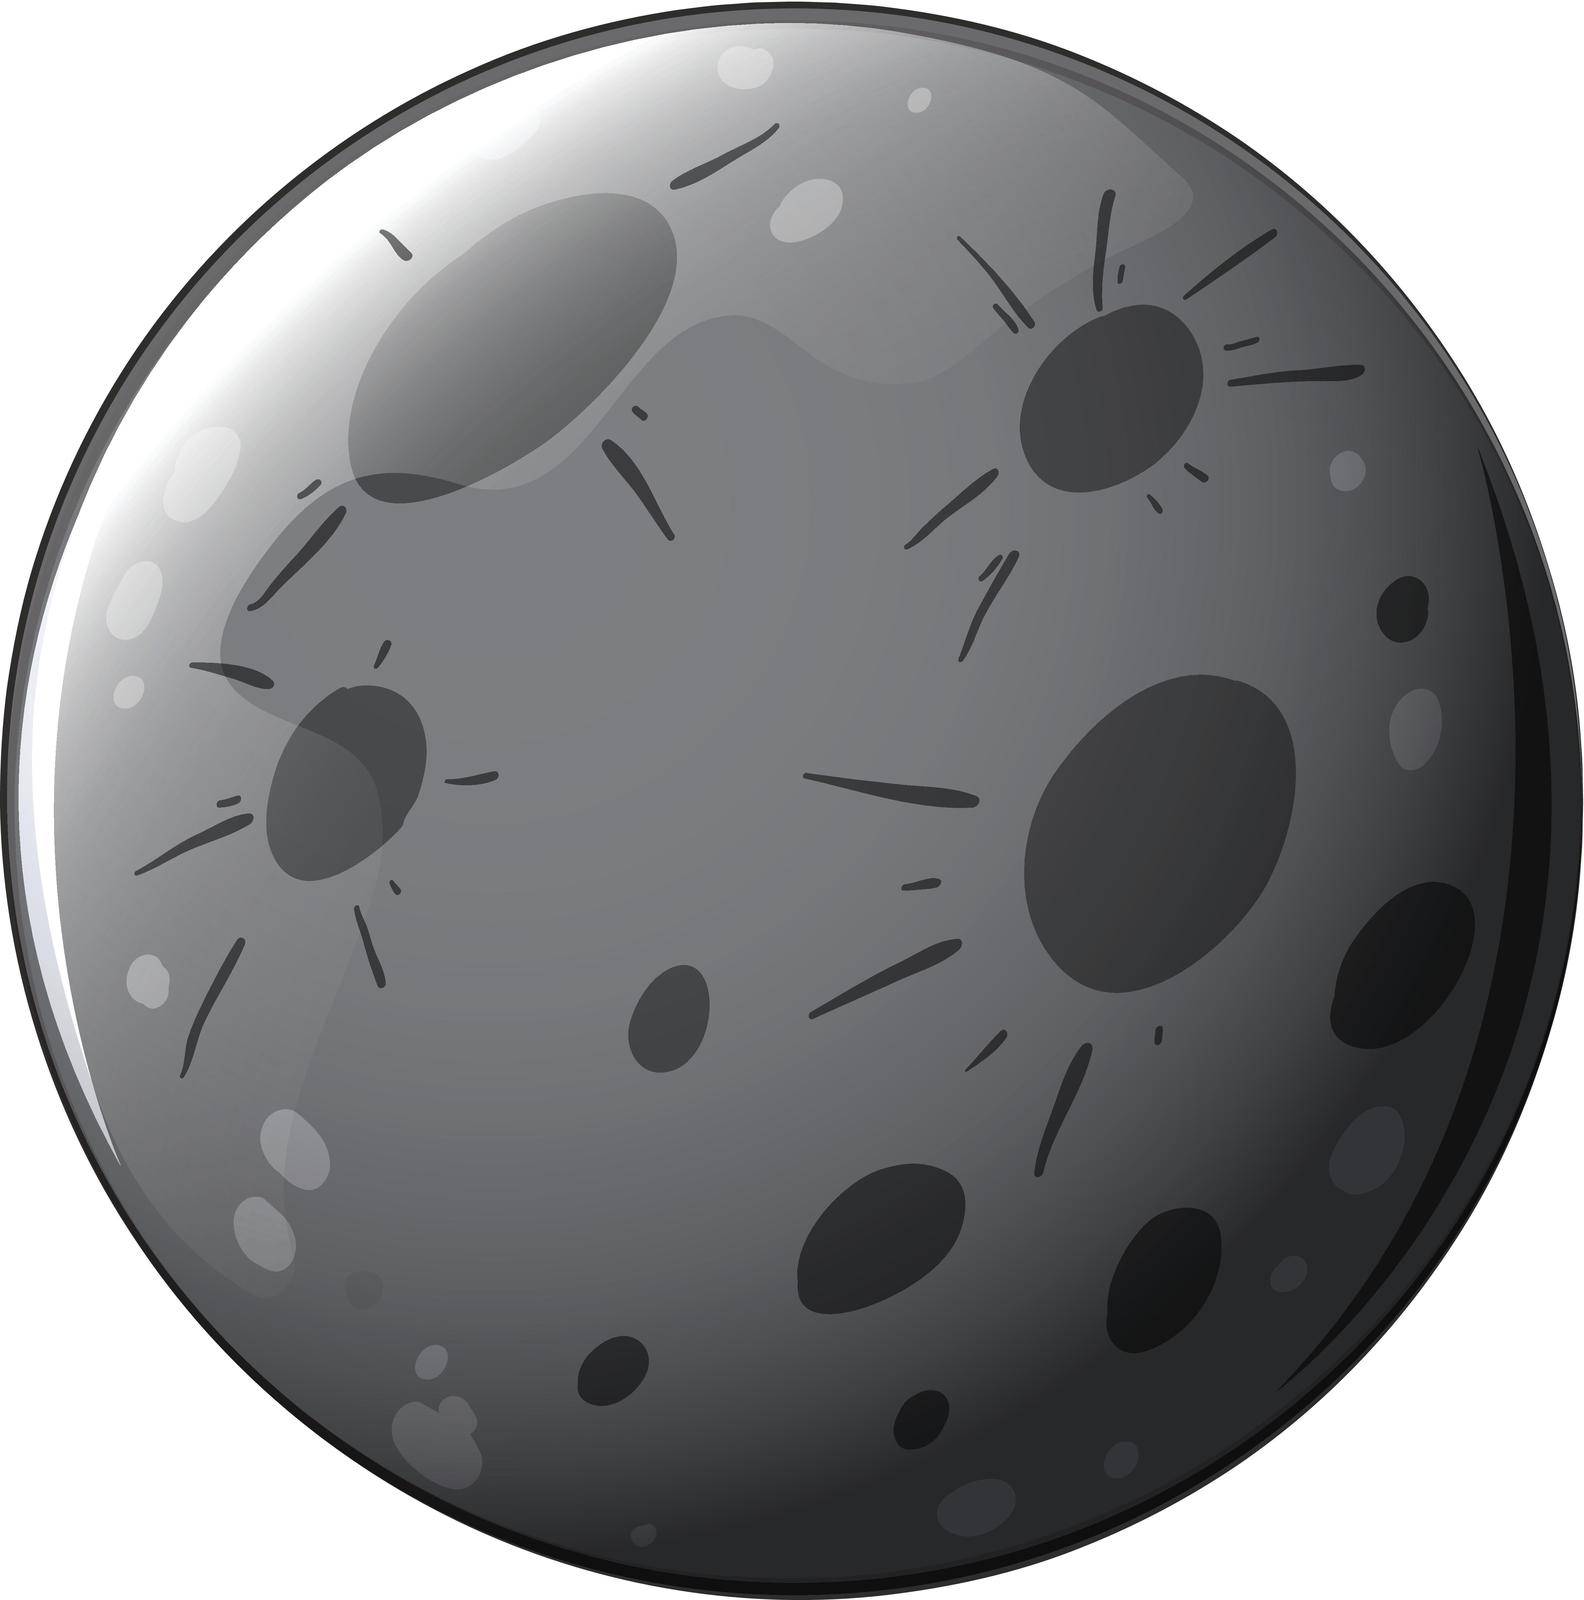 Illustration of a grey planet on a white background